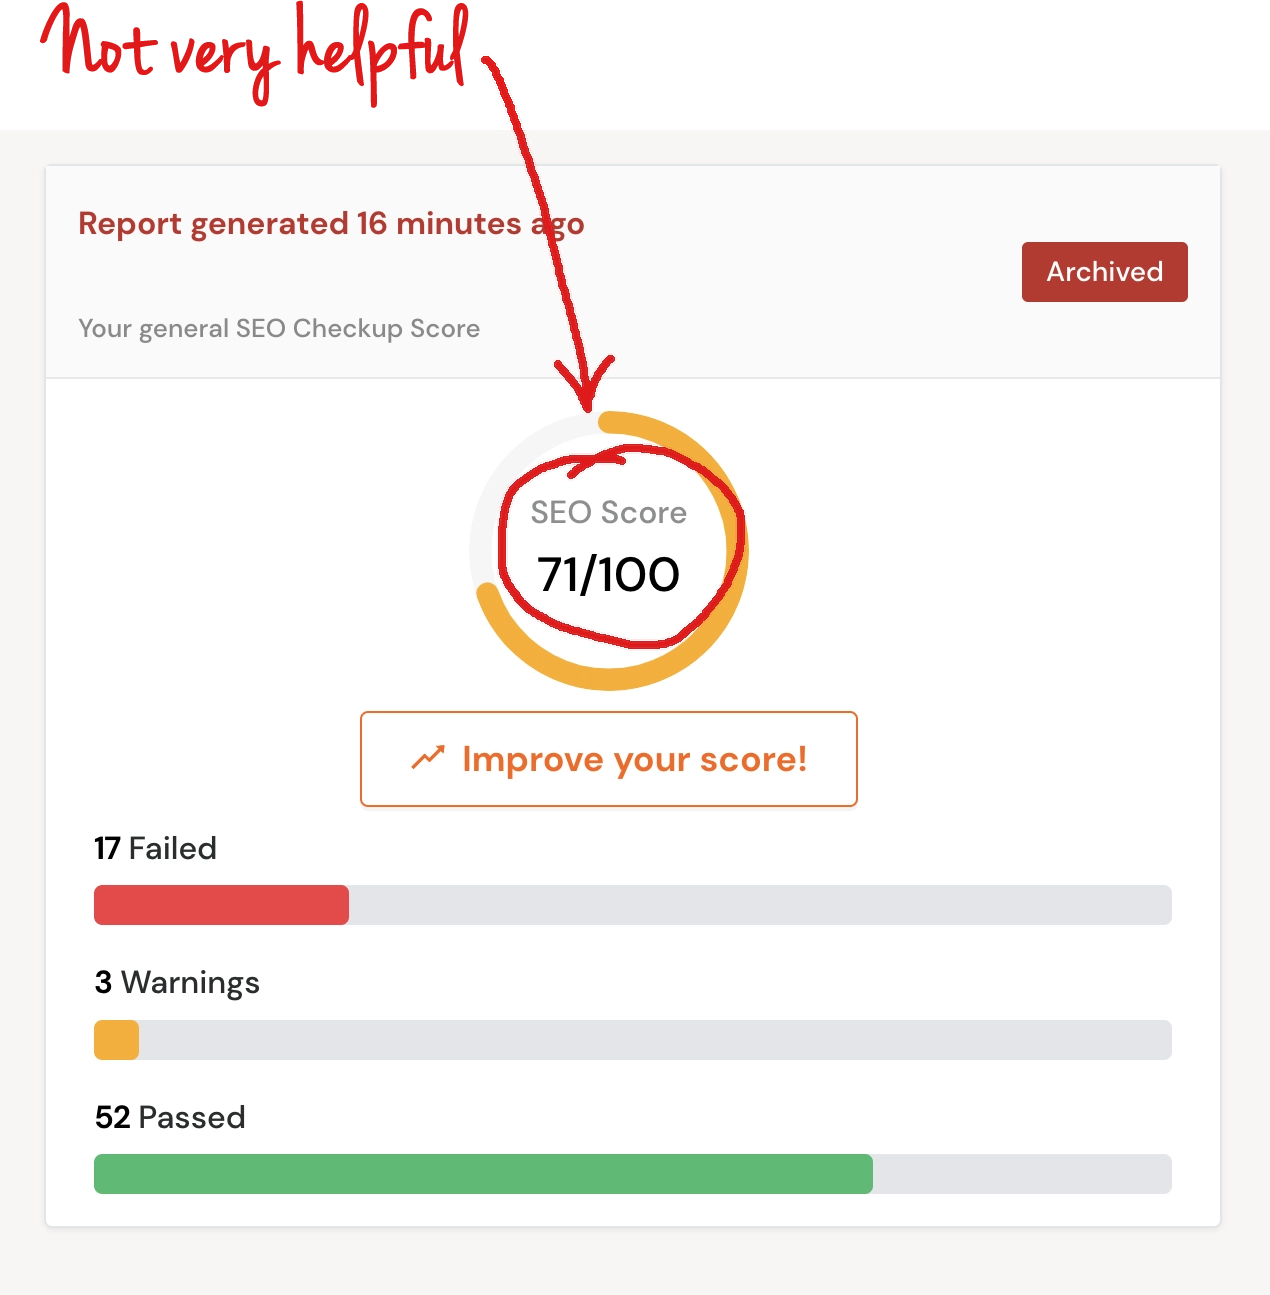 an SEO score from a free SEO audit tool tells you very little about your actual SEO situation